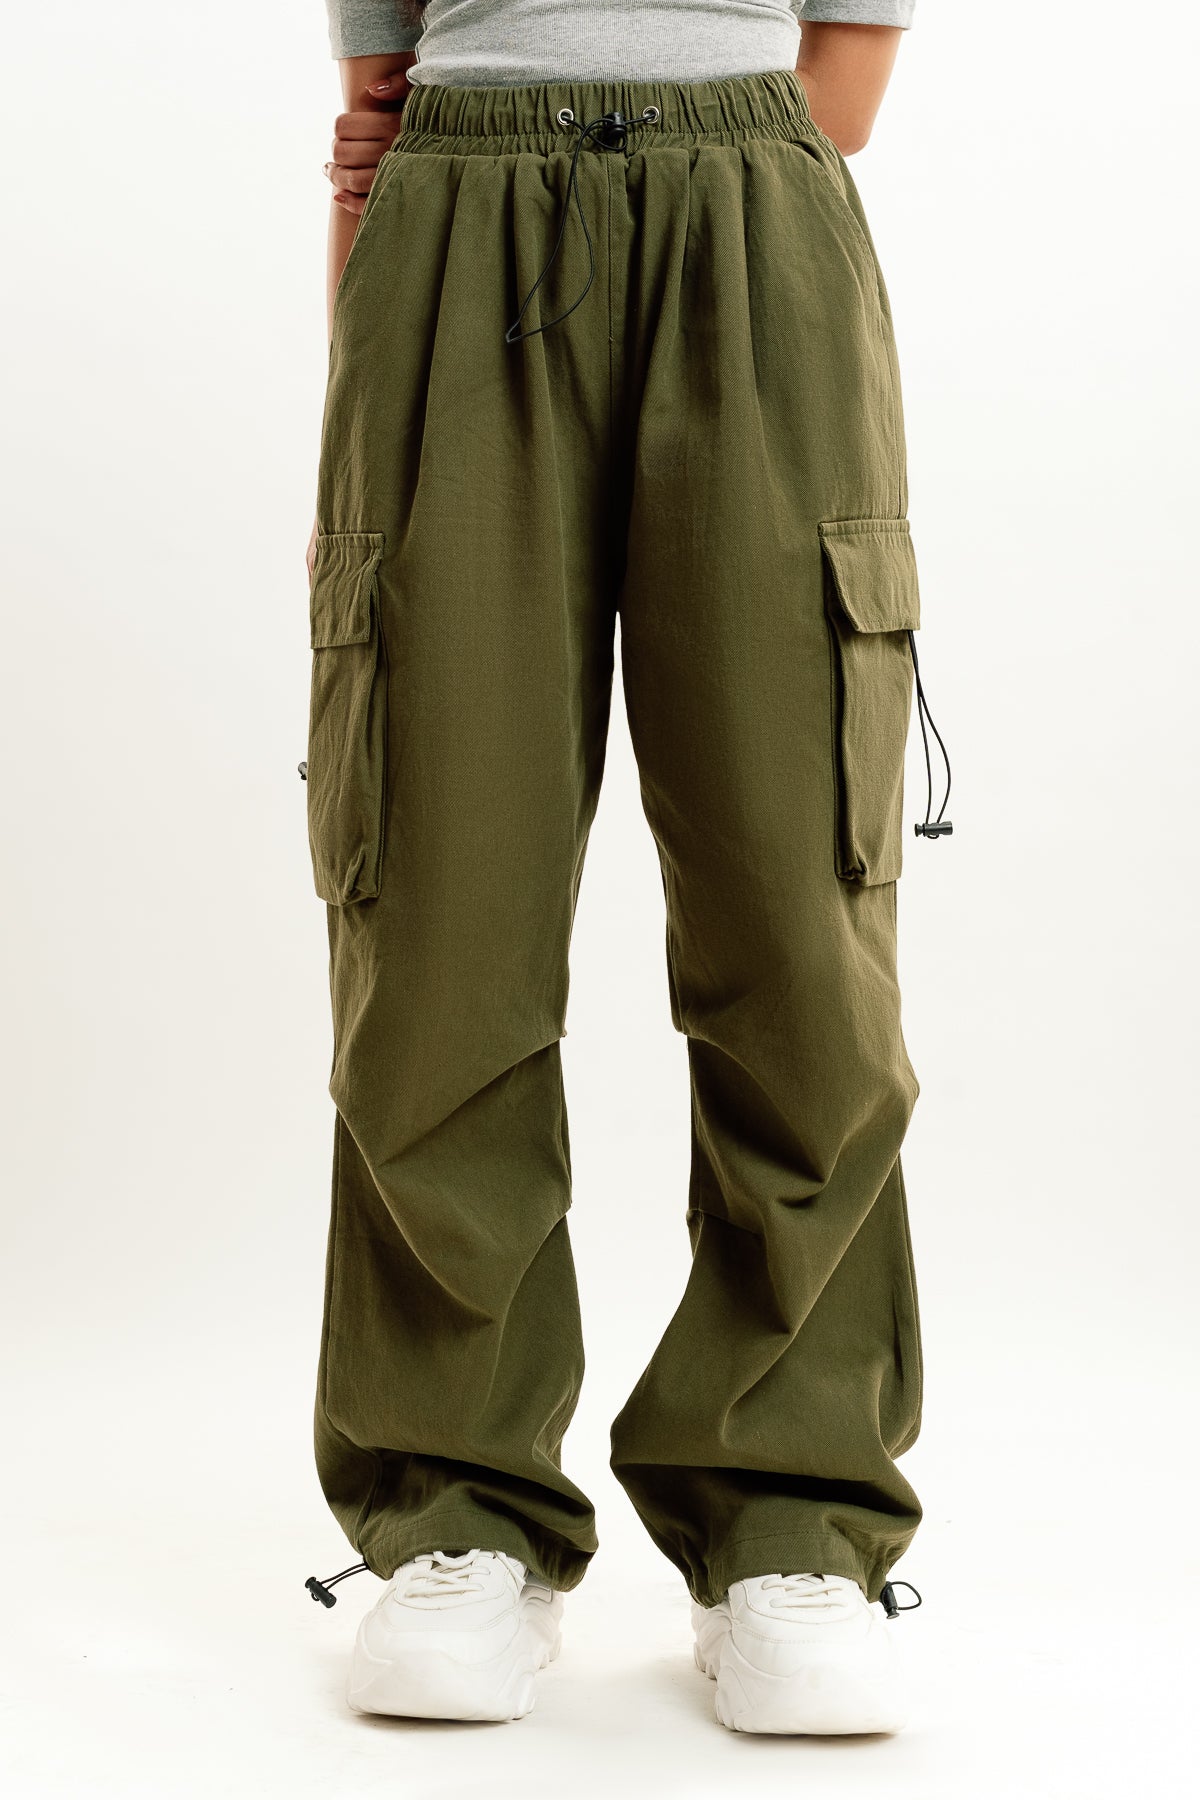 Buy Olive Green Cotton Flax Elasticated High-rise Cargo Pant, Pant With  Pockets, Women Cargo Pant, Customizable Pant Etsw Online in India - Etsy